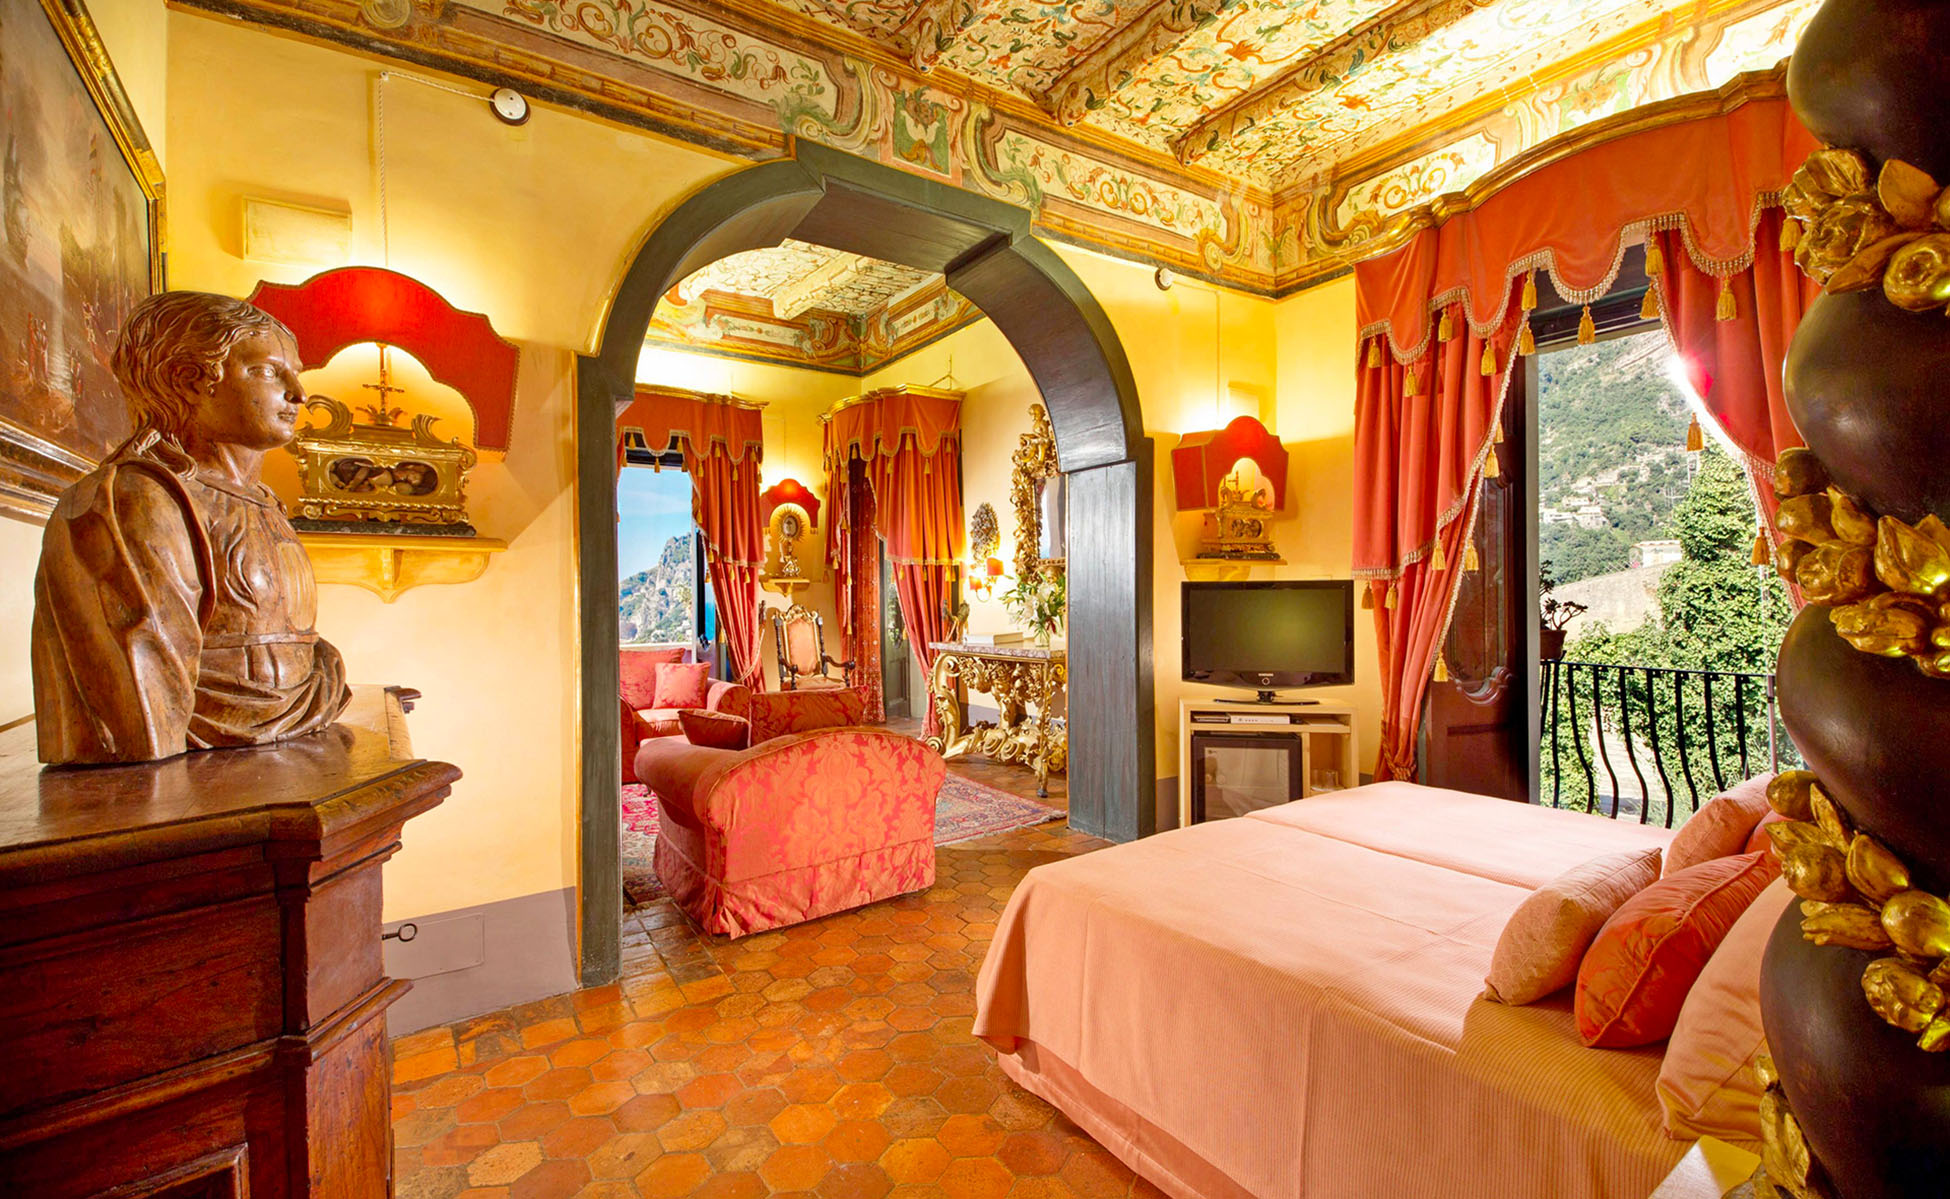 <p>Lovelydays Luxury Rentals introduce you pictures of a charming house in the heart of Positano</p>